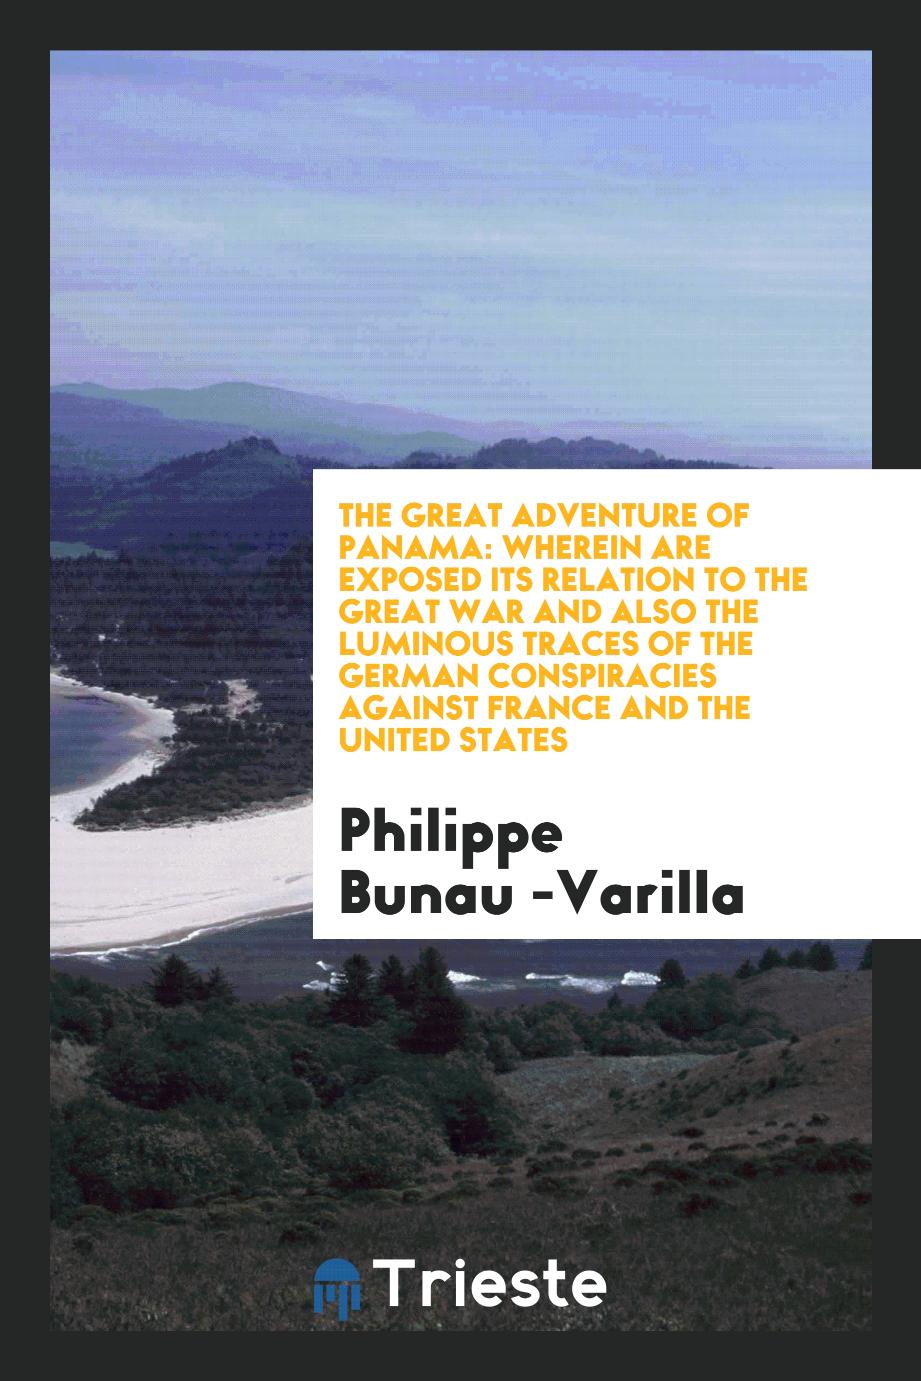 The Great Adventure of Panama: Wherein Are Exposed Its Relation to the Great War and Also the Luminous Traces of the German Conspiracies Against France and the United States